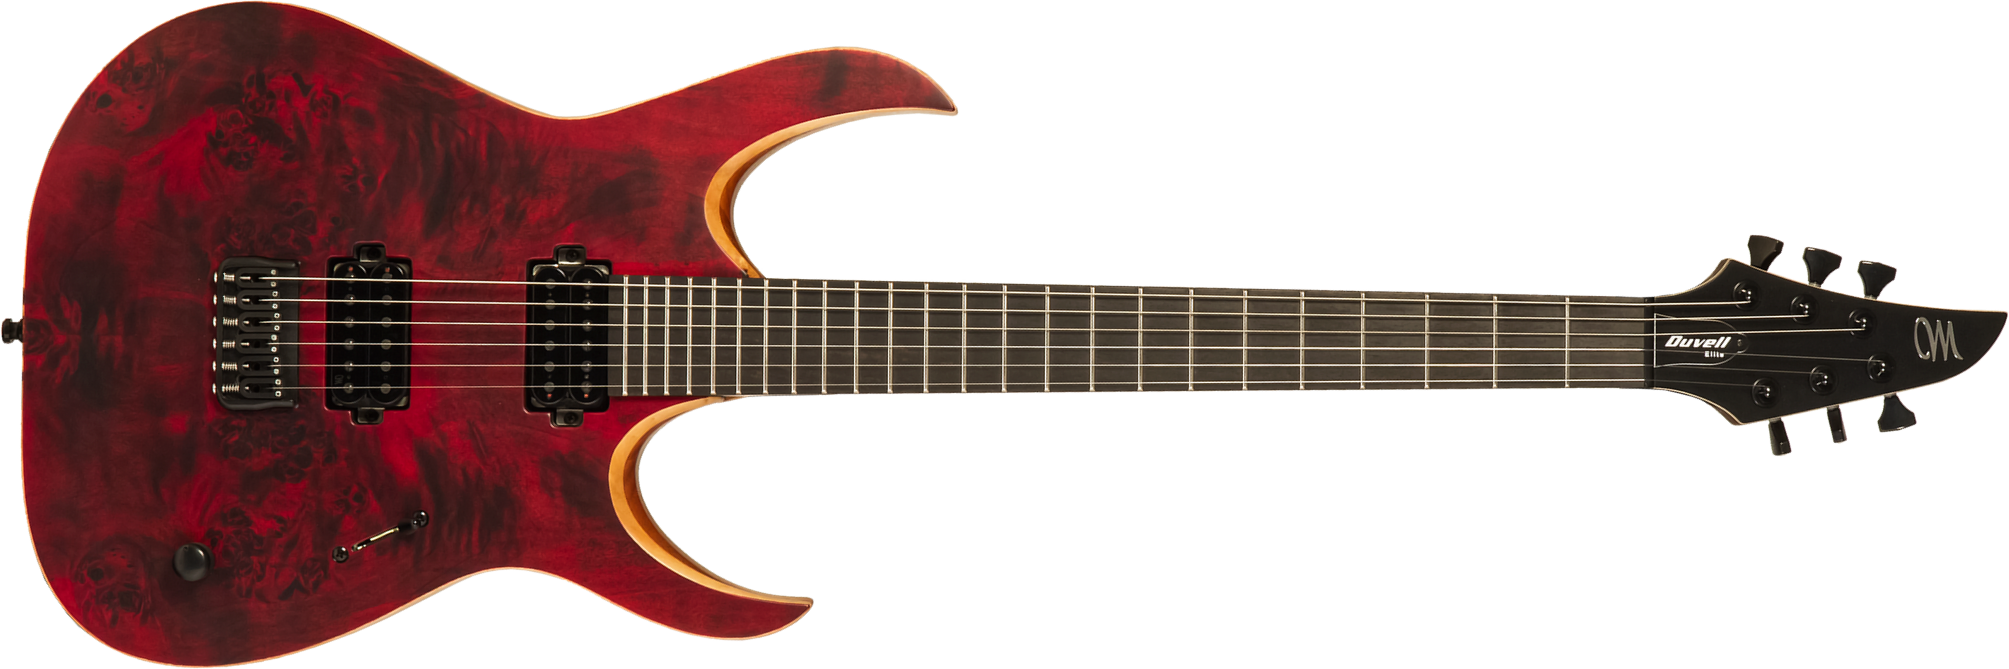 Mayones Guitars Duvell Elite 6 2h Bare Knuckle Ht Eb #df2301294 - Trans Dirty Red Satine - Guitarra electrica metalica - Main picture